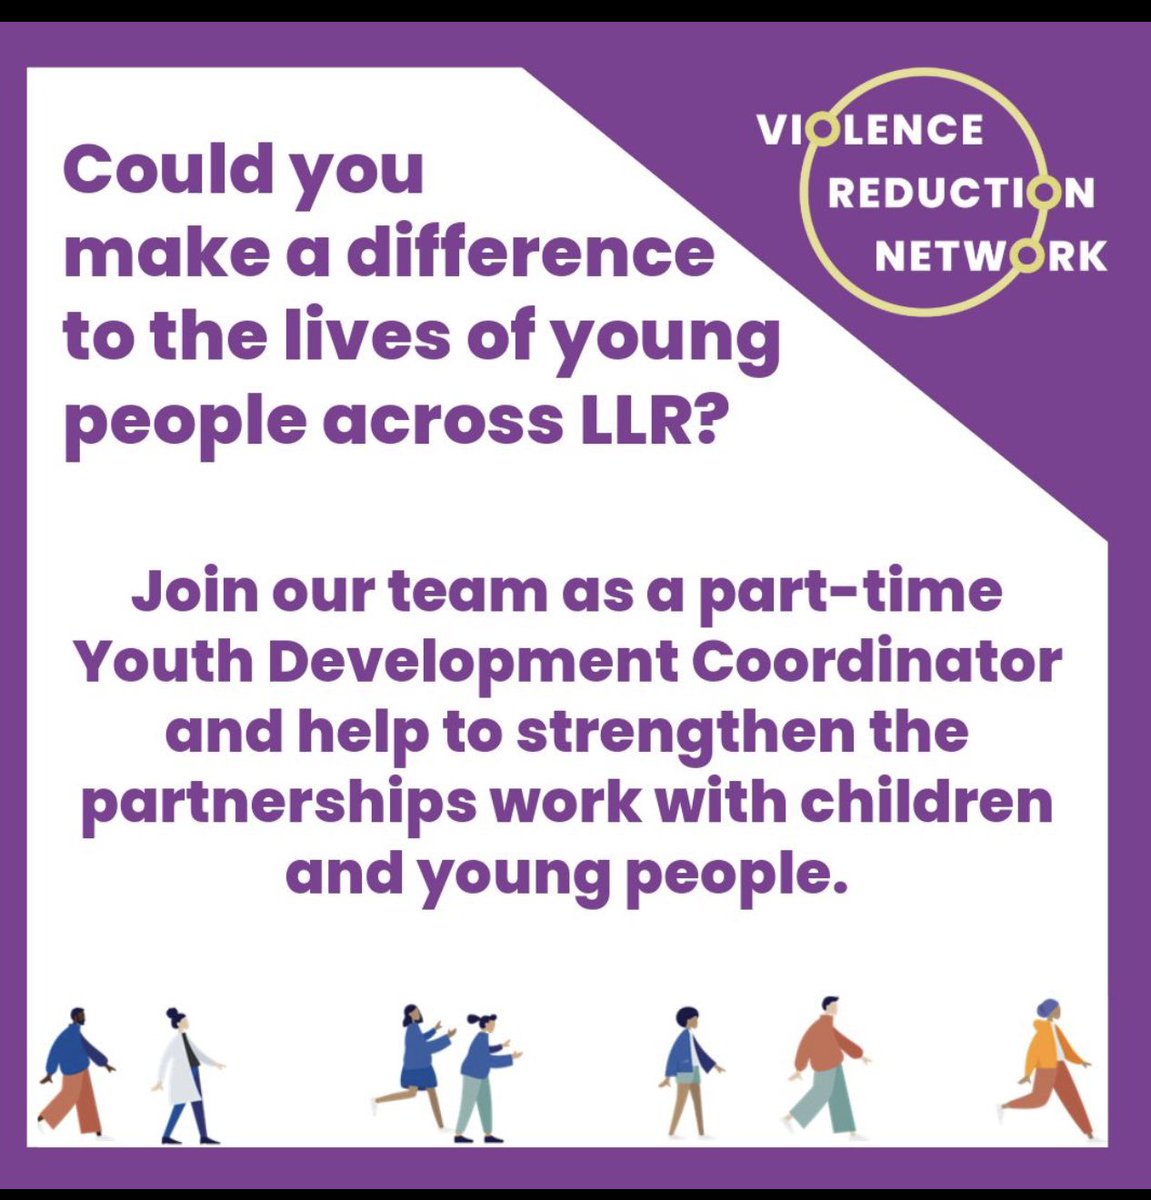 Do you want to make a difference to the lives of children and young people?. The @VR_Network has an exciting part-time Youth Development Coordinator vacancy. 💚 You will be strengthening involvement with children and young people and external orgs. 🙏🏻 shrsc.tal.net/vx/lang-en-GB/…